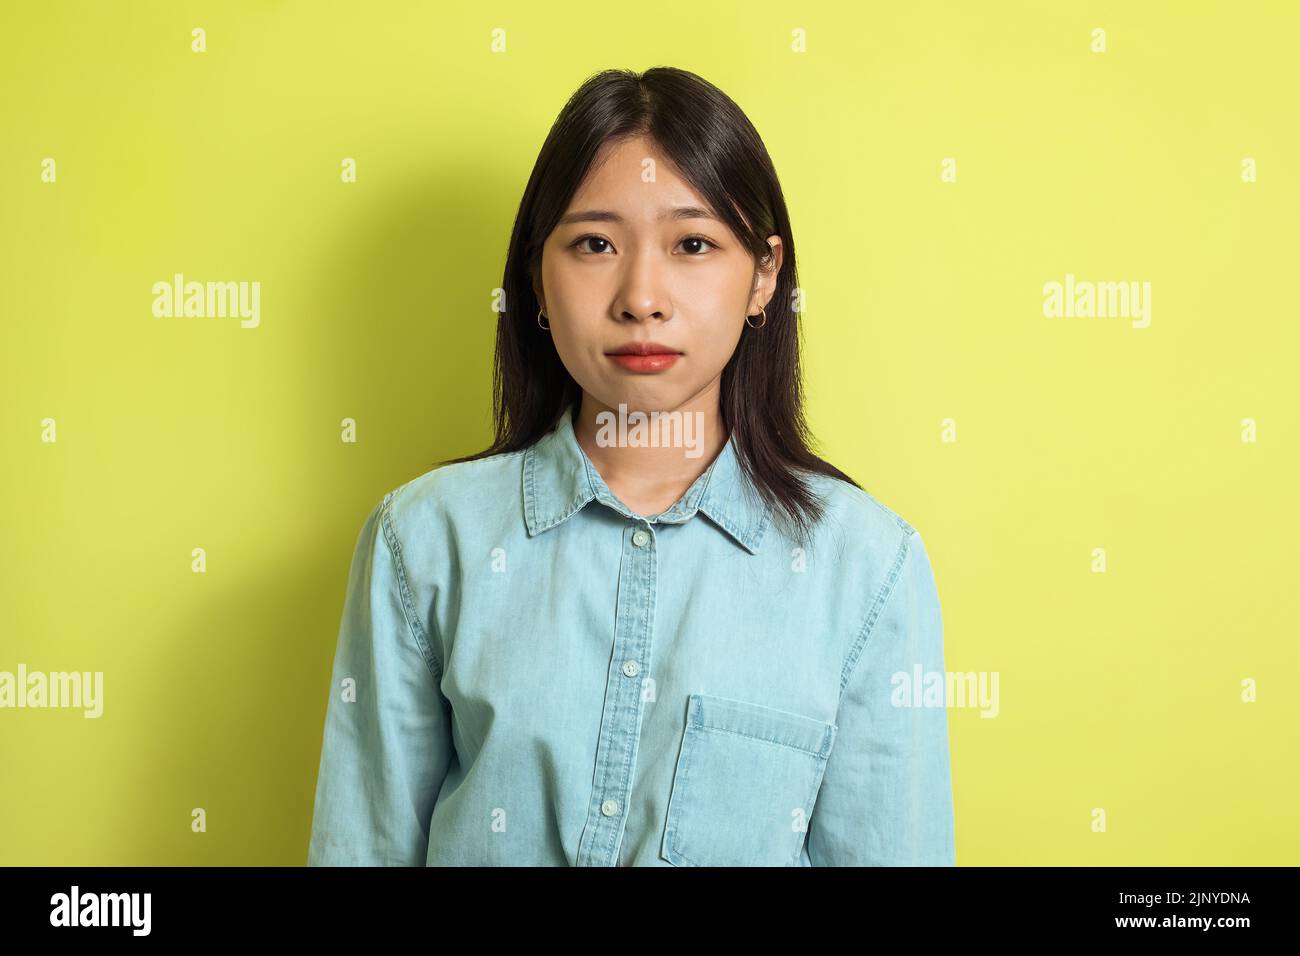 Portrait Of Serious Korean Woman Posing Standing Over Yellow Background Stock Photo